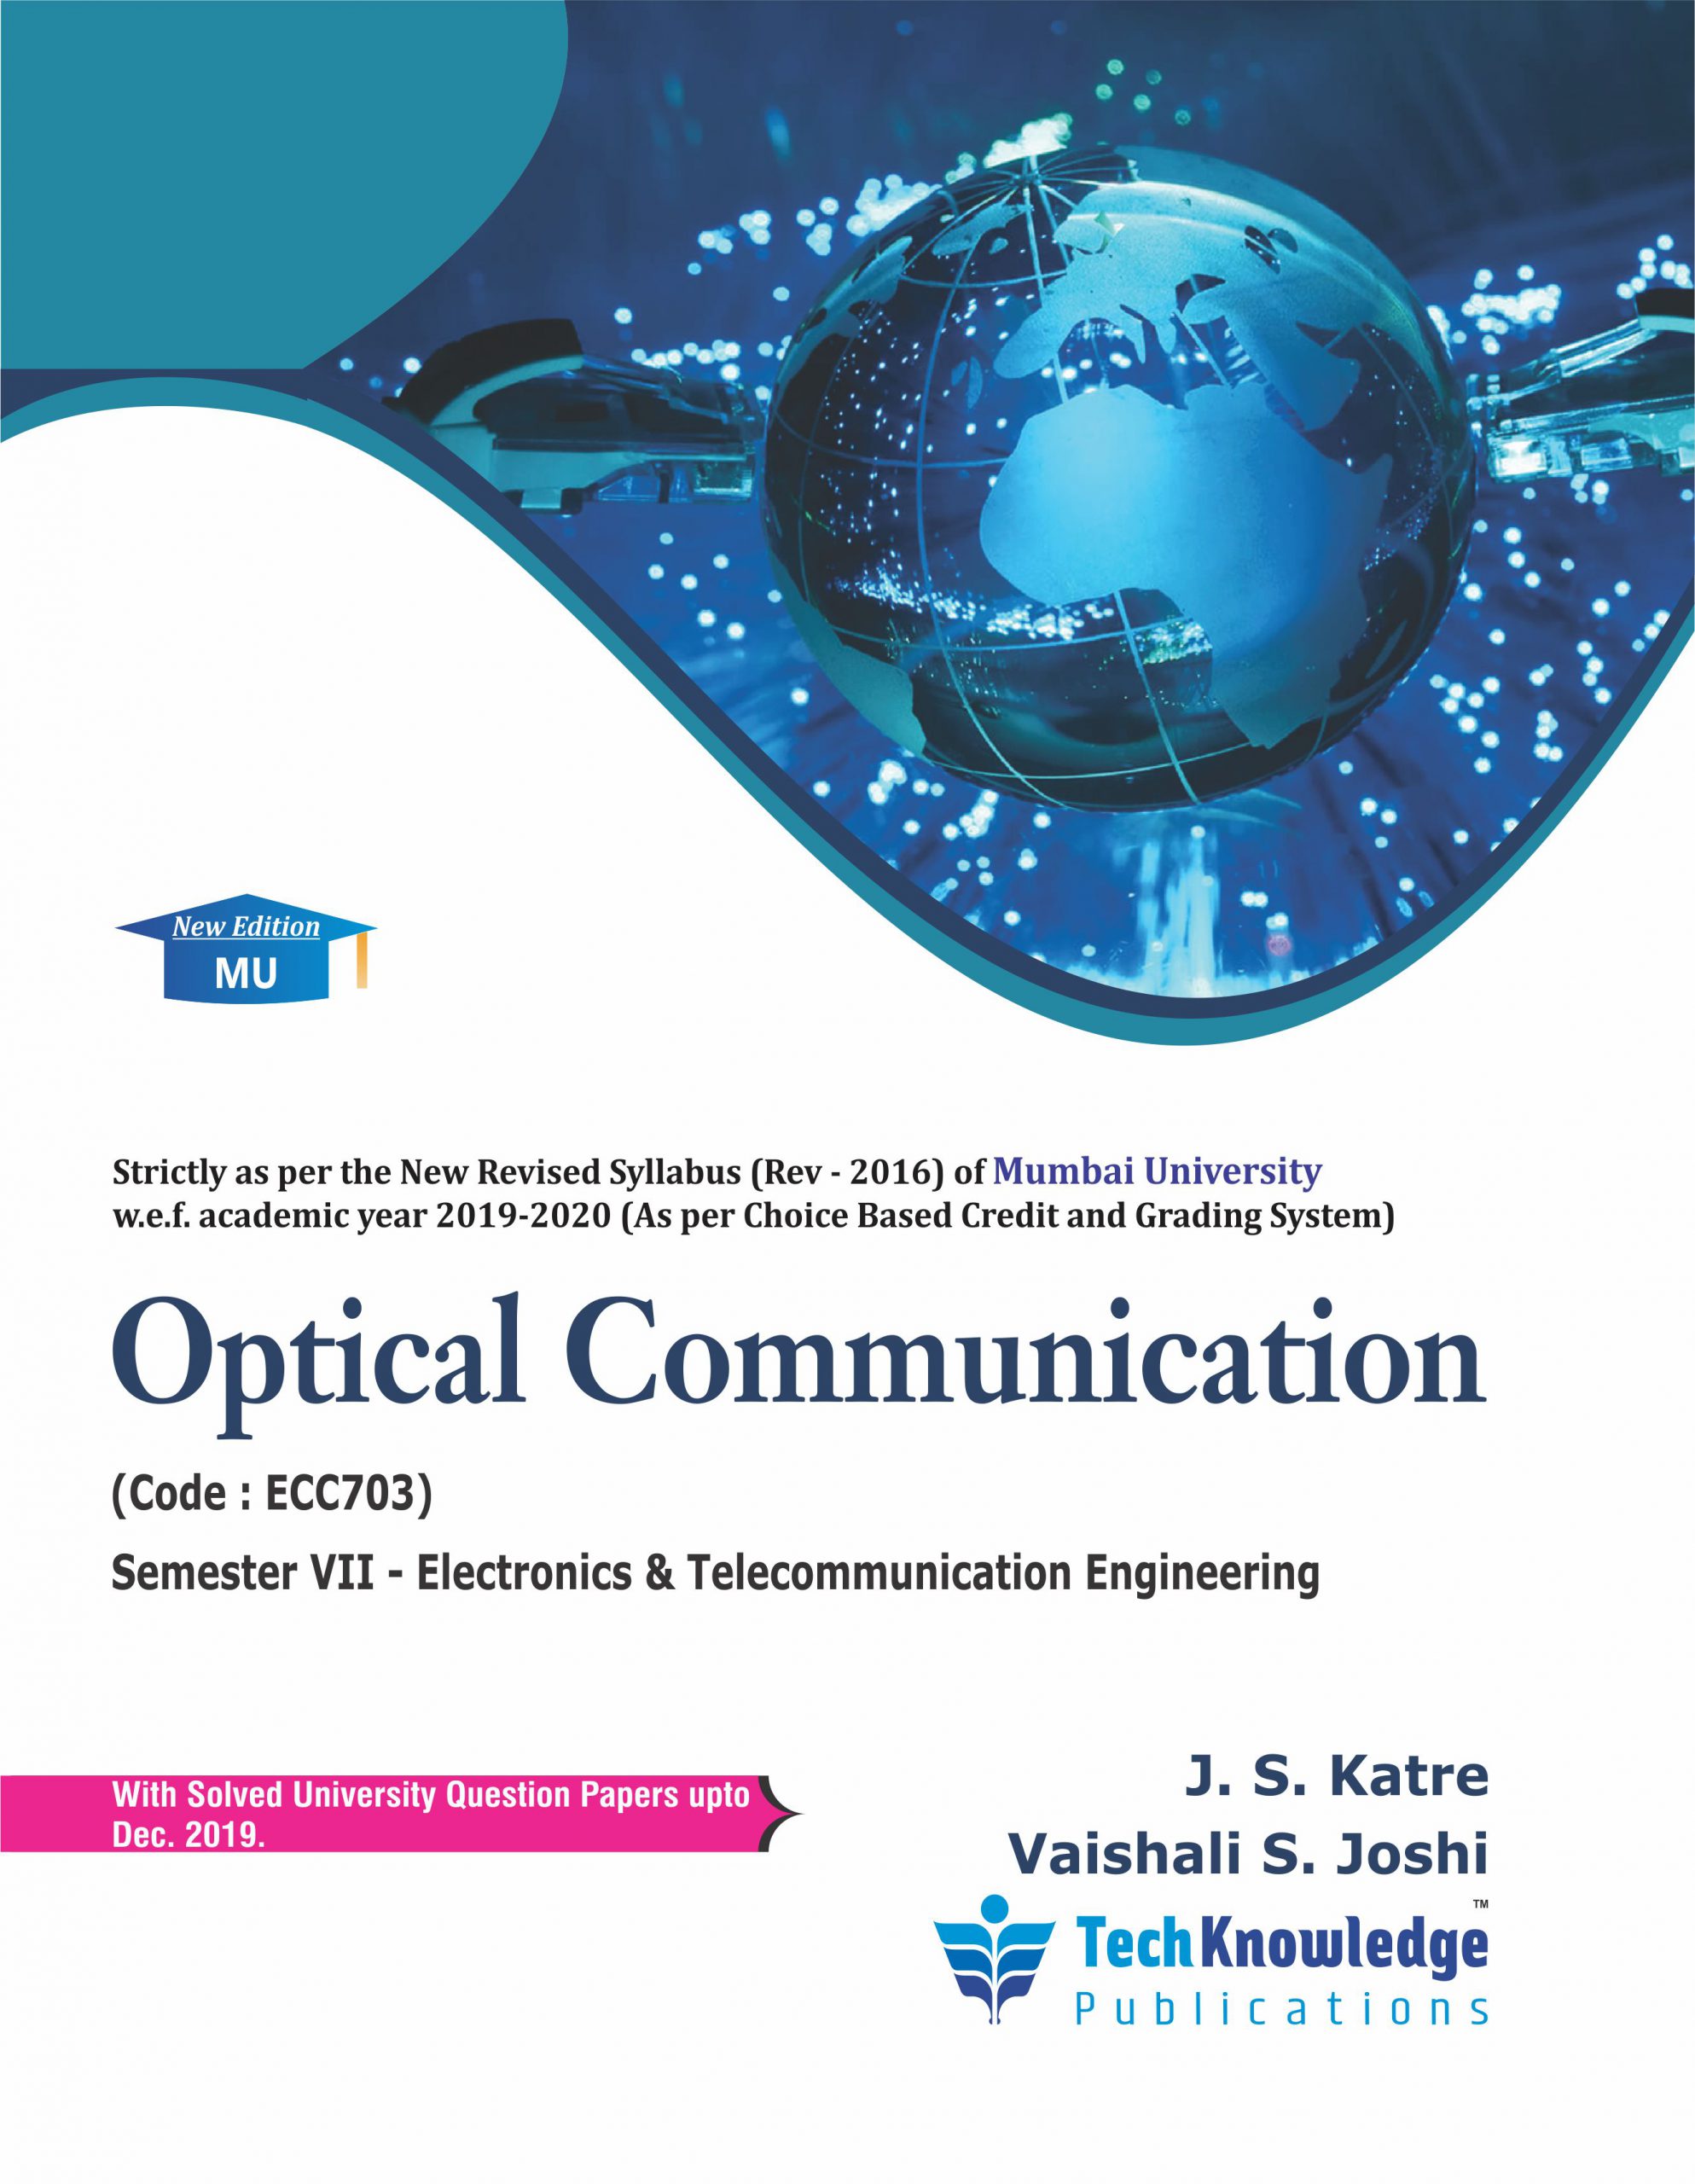 research article on optical communication